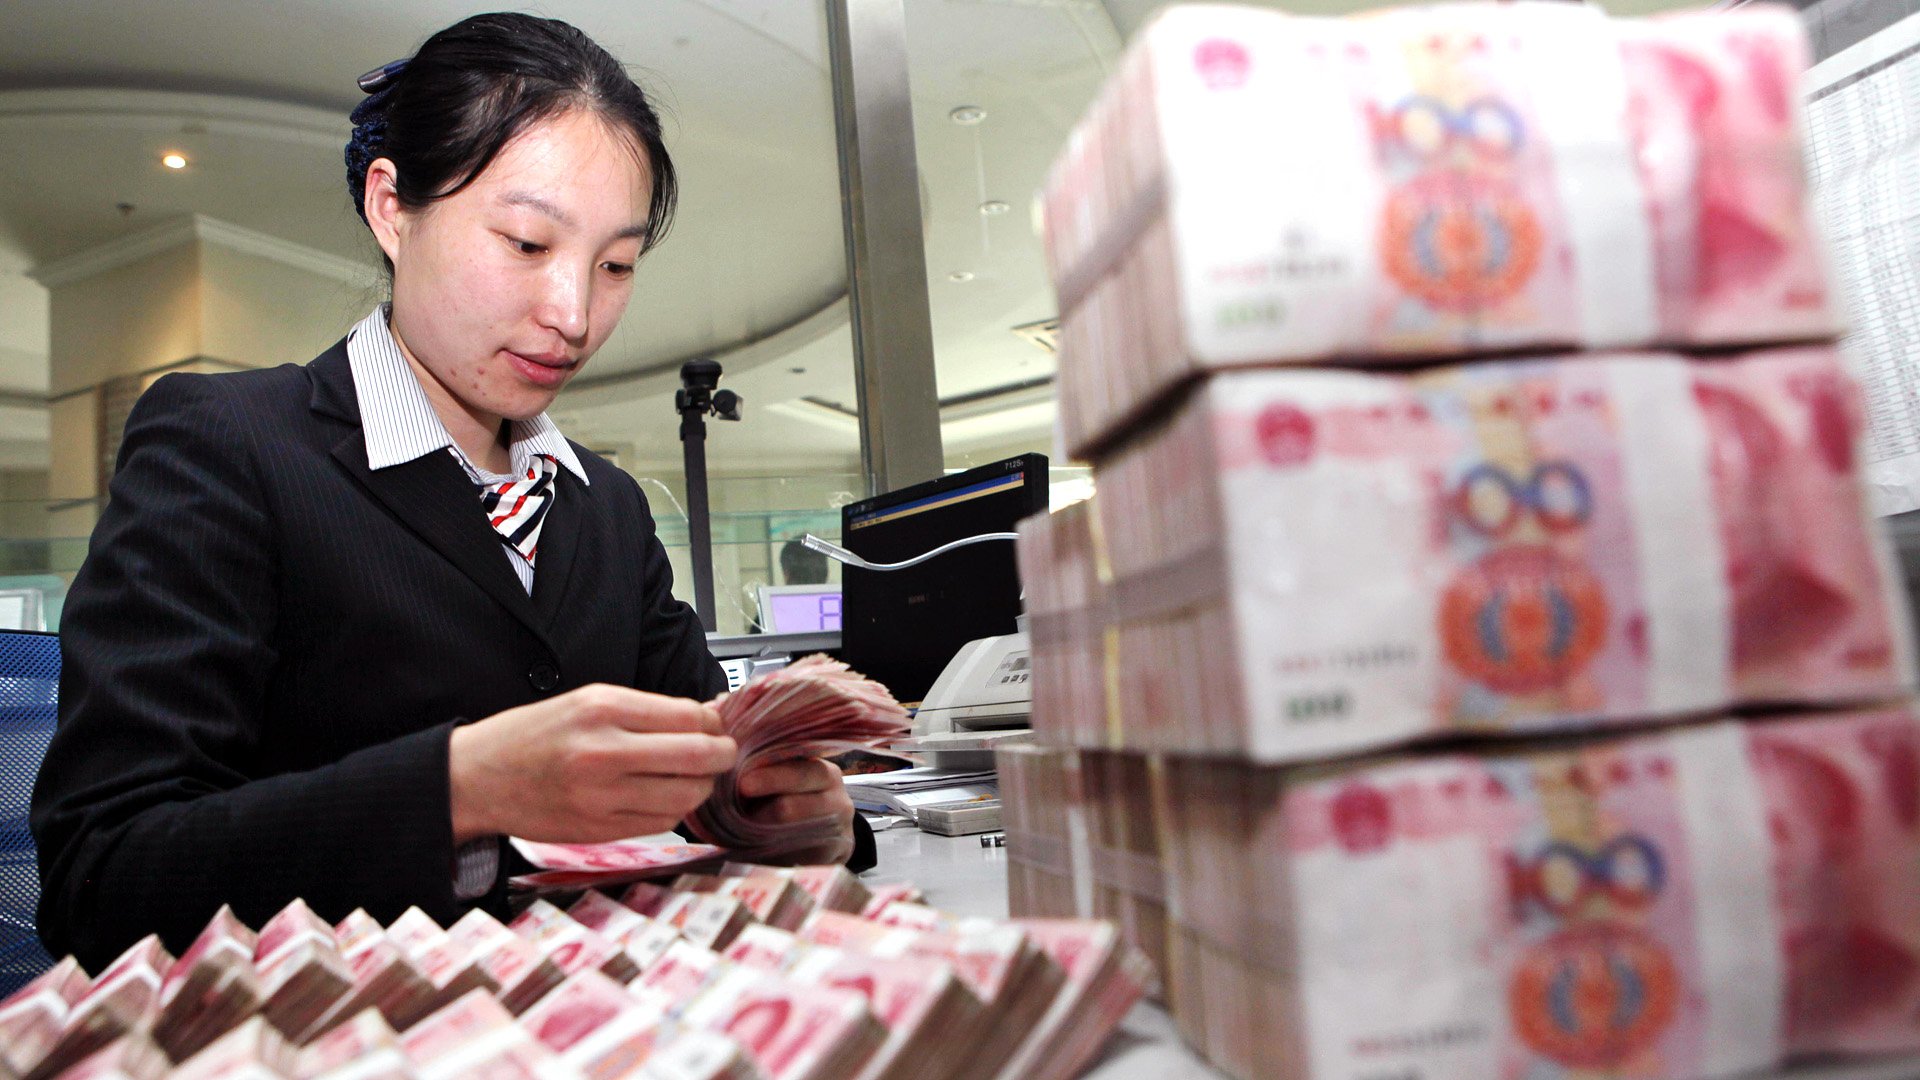 These programmes would help internationalise the renminbi and encourage cross-border investment, Pan Gongsheng added.